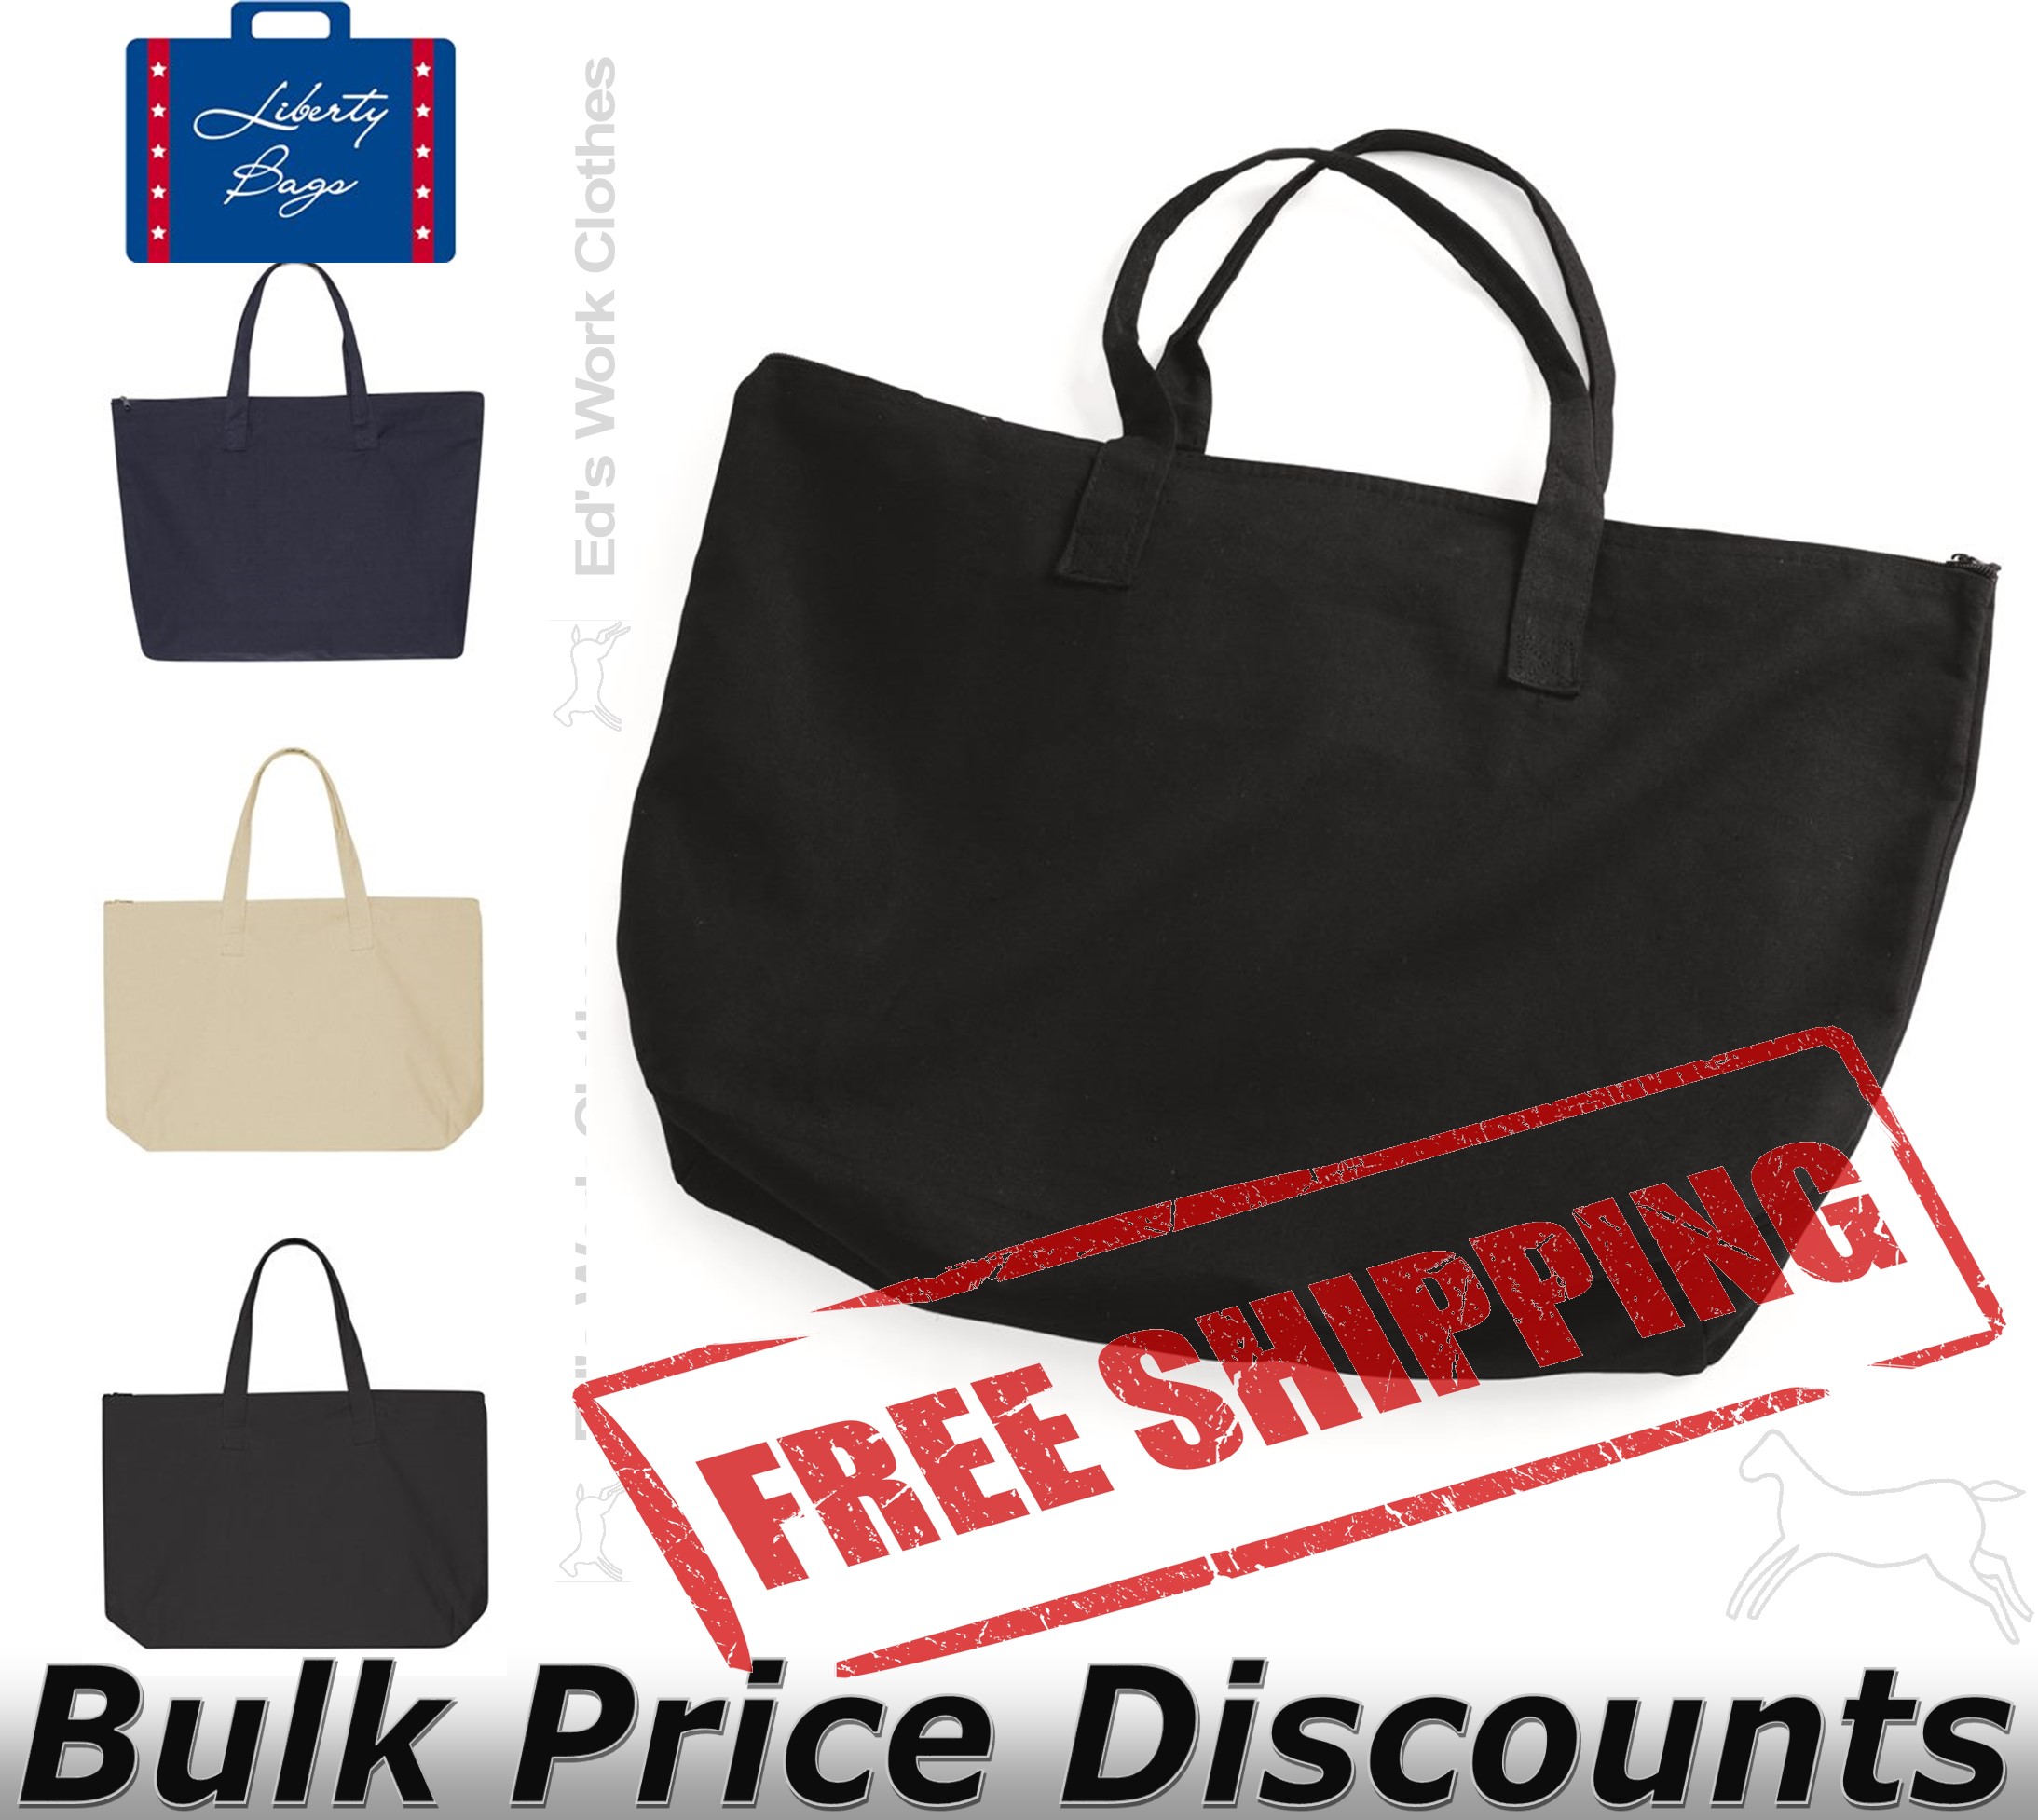 tote with top zippered closure bag 8863